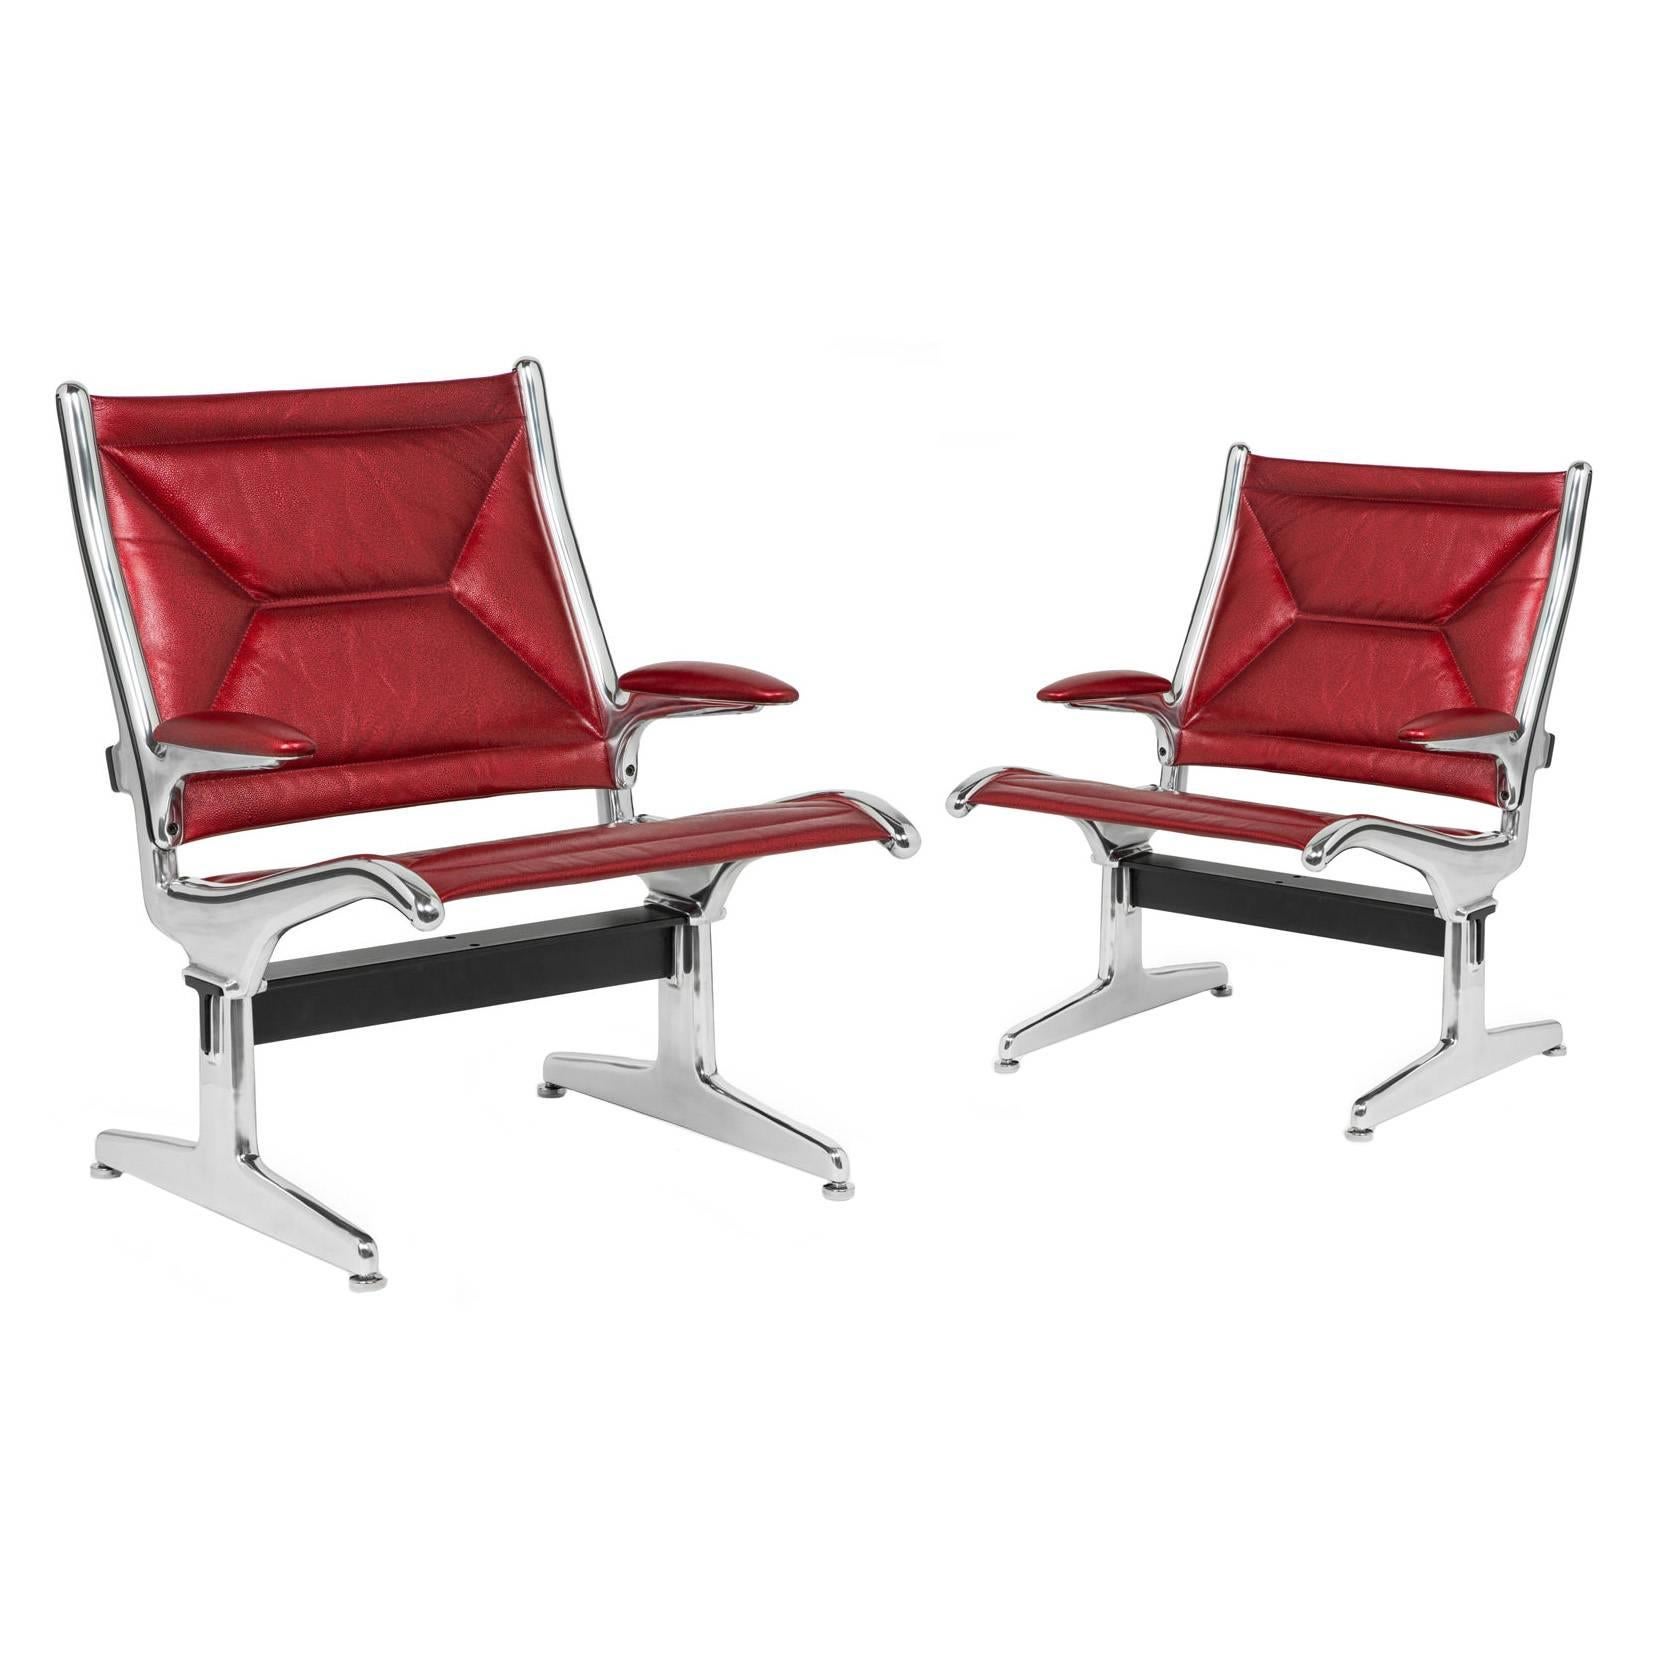 Charles Eames for Herman Miller Tandem Aluminum Lounge Chairs in Edelman Leather